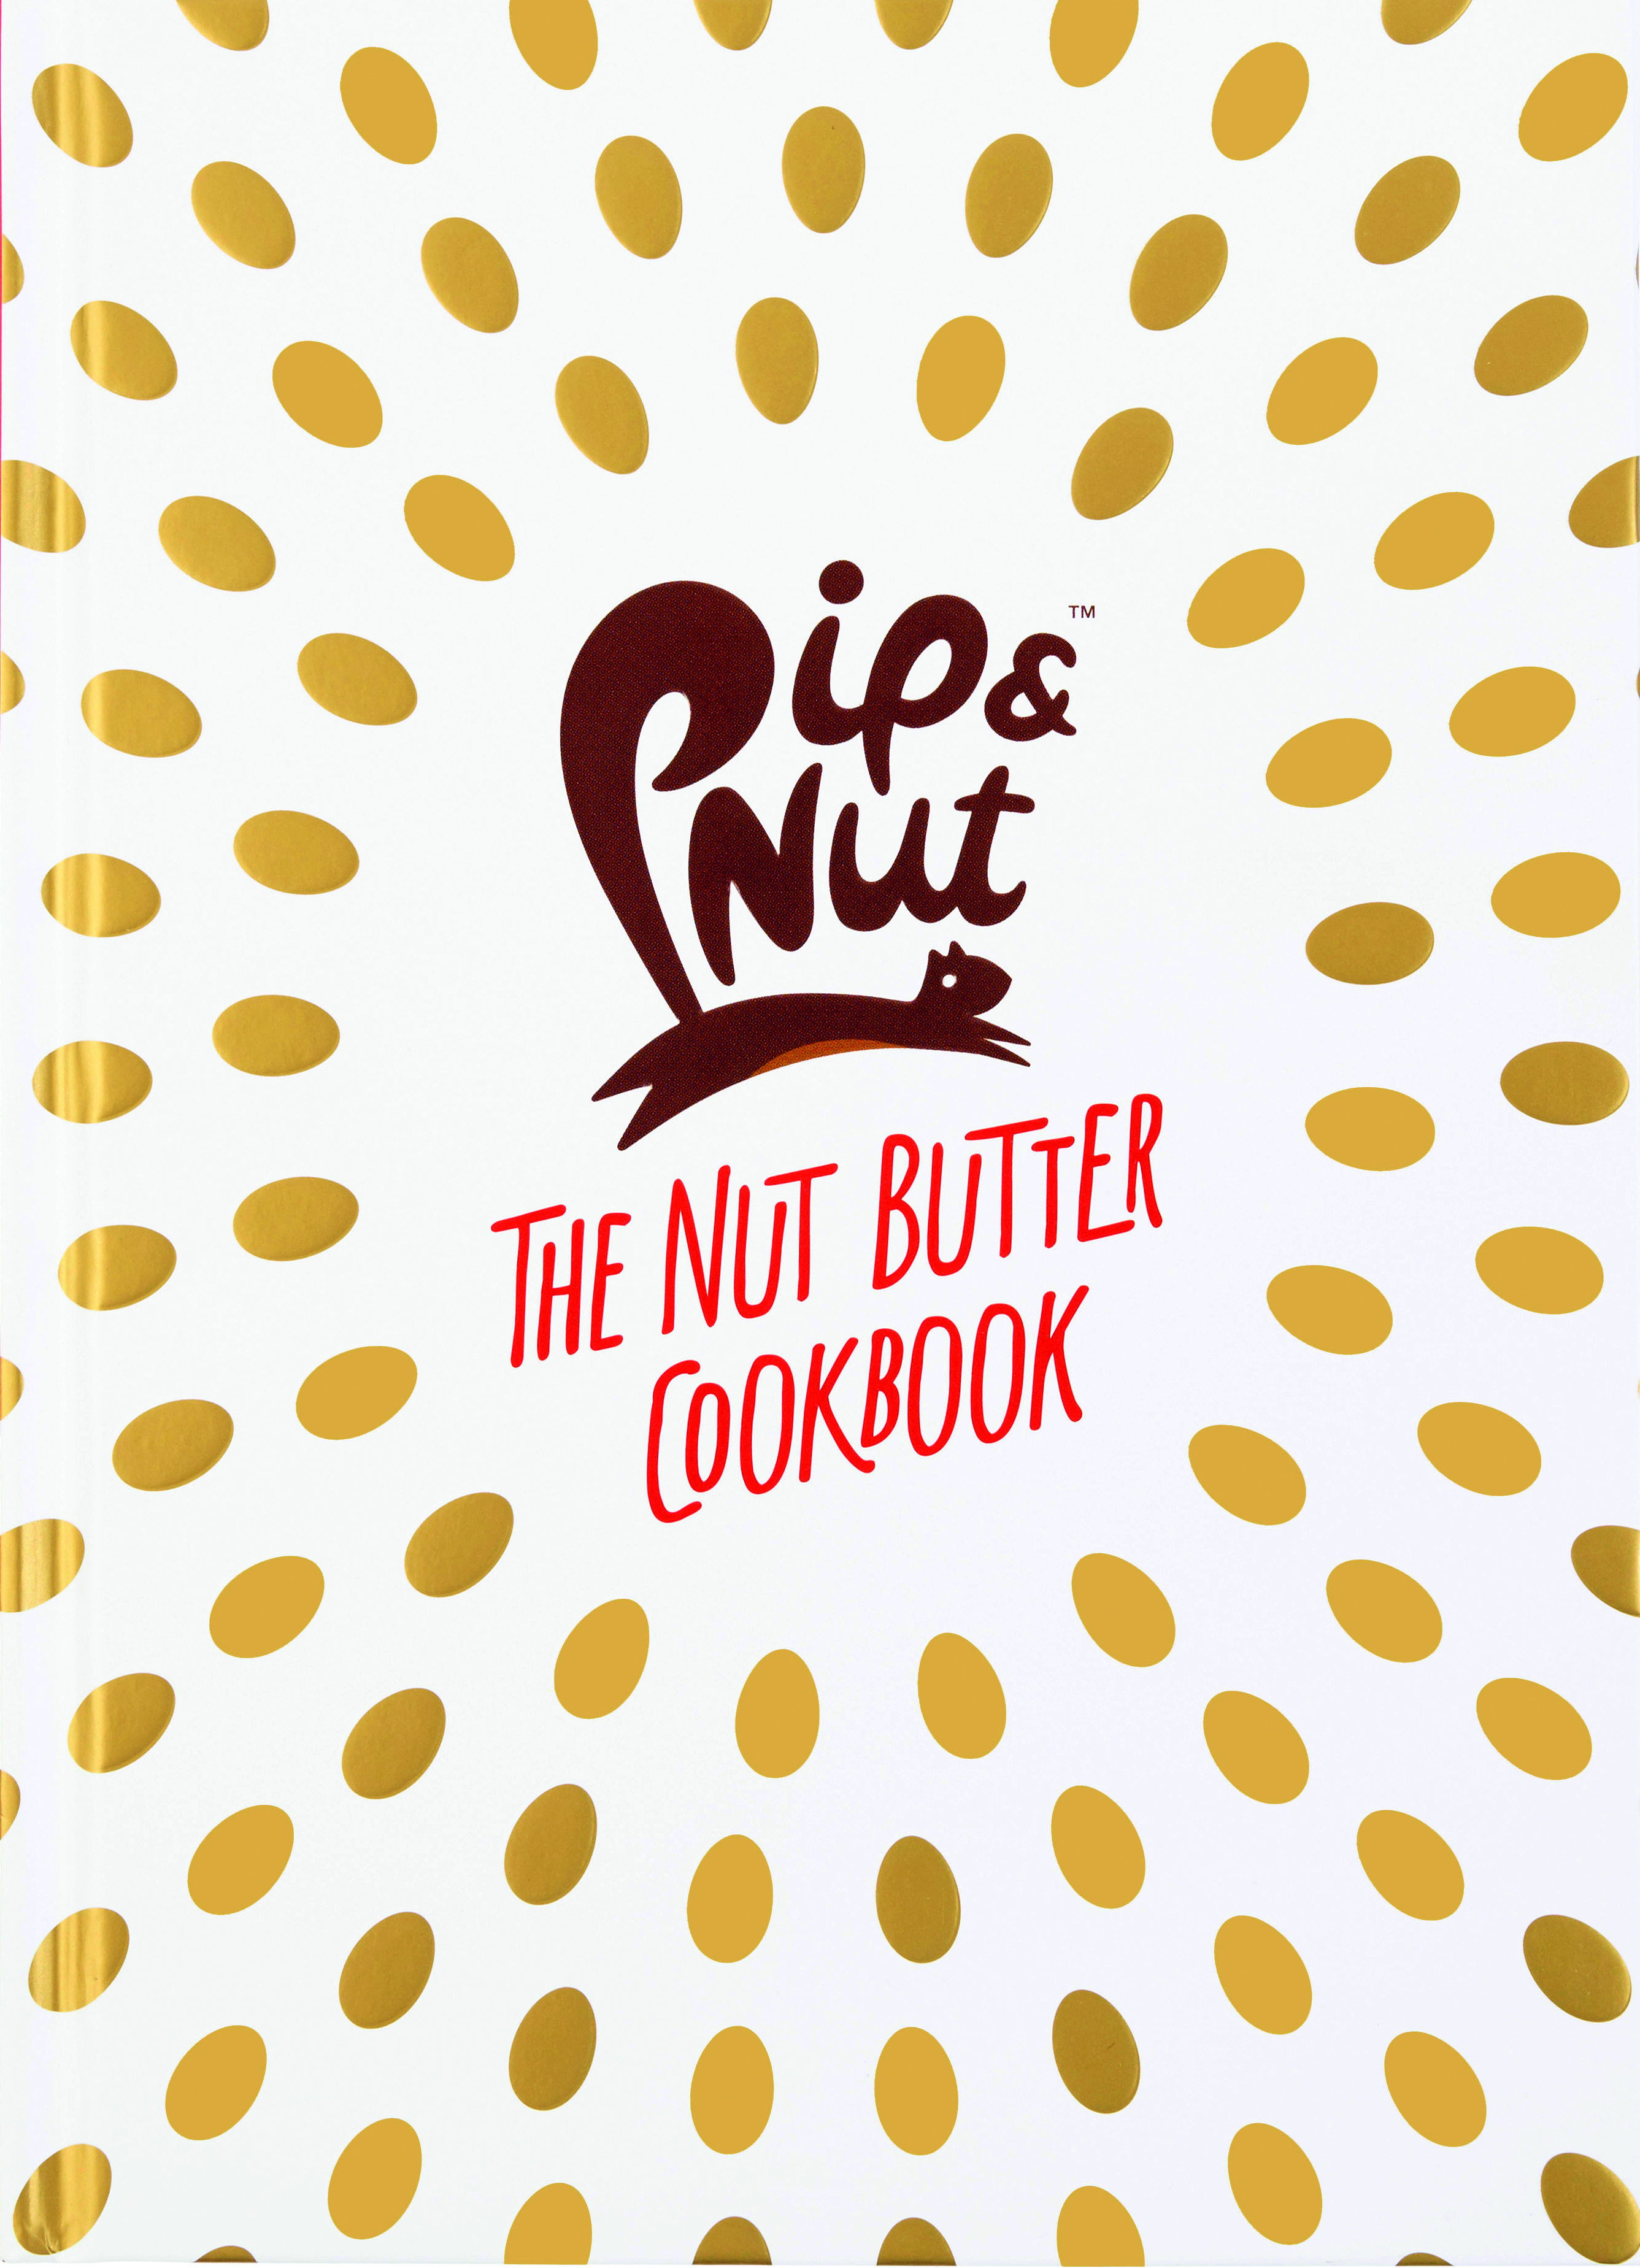 The Pip & Nut Butter Cookbook